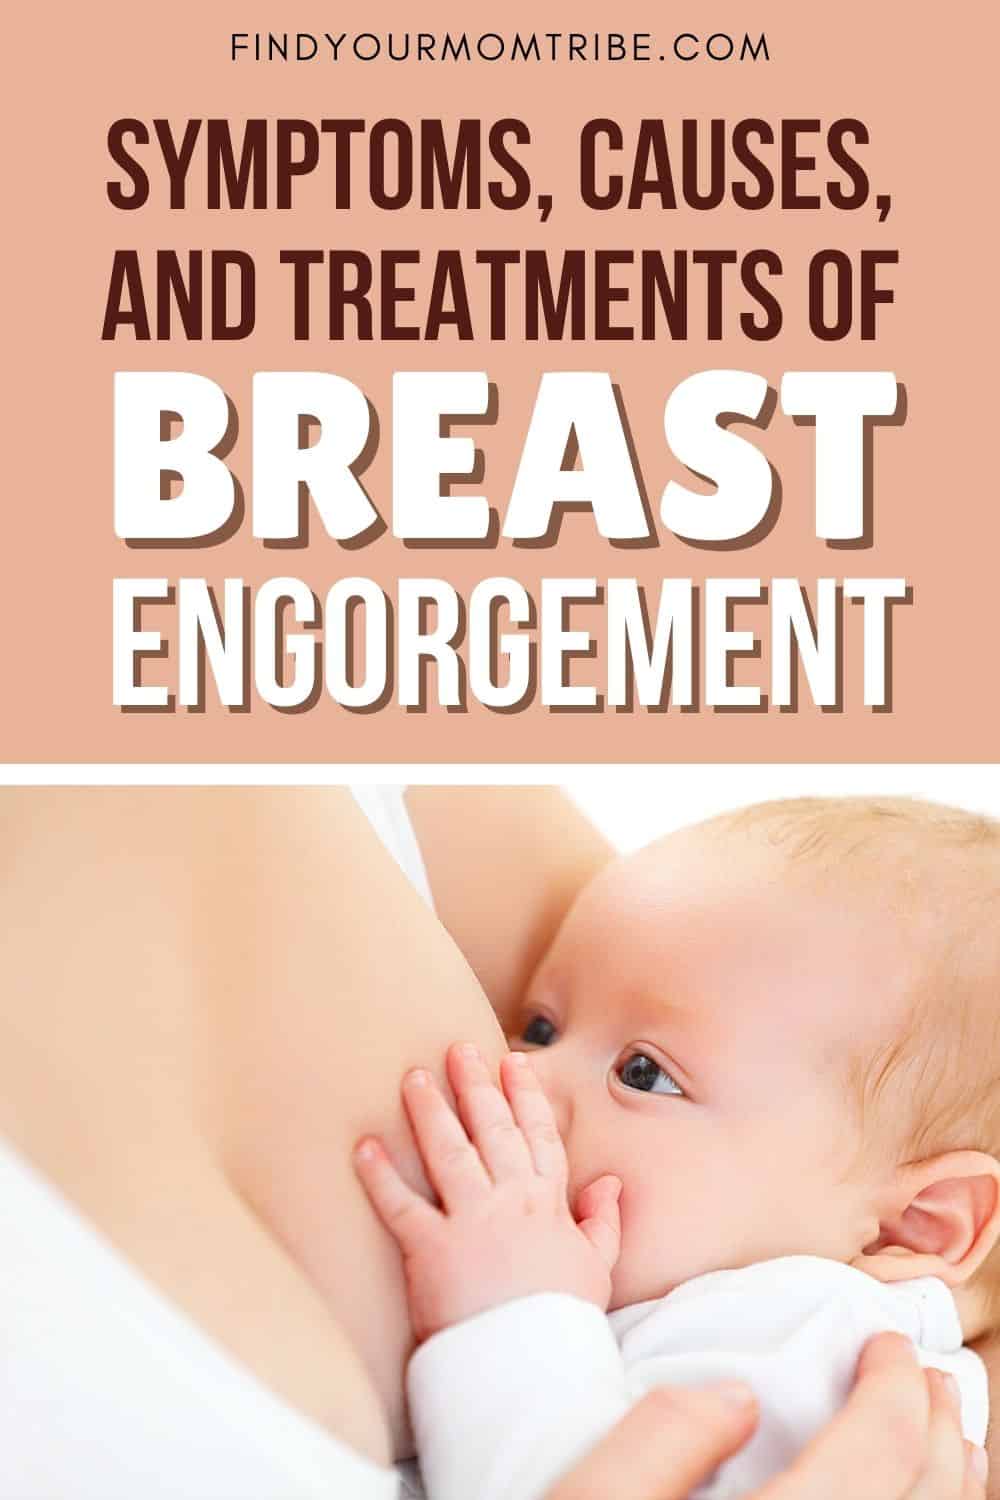 Symptoms, Causes, And Treatments Of Breast Engorgement